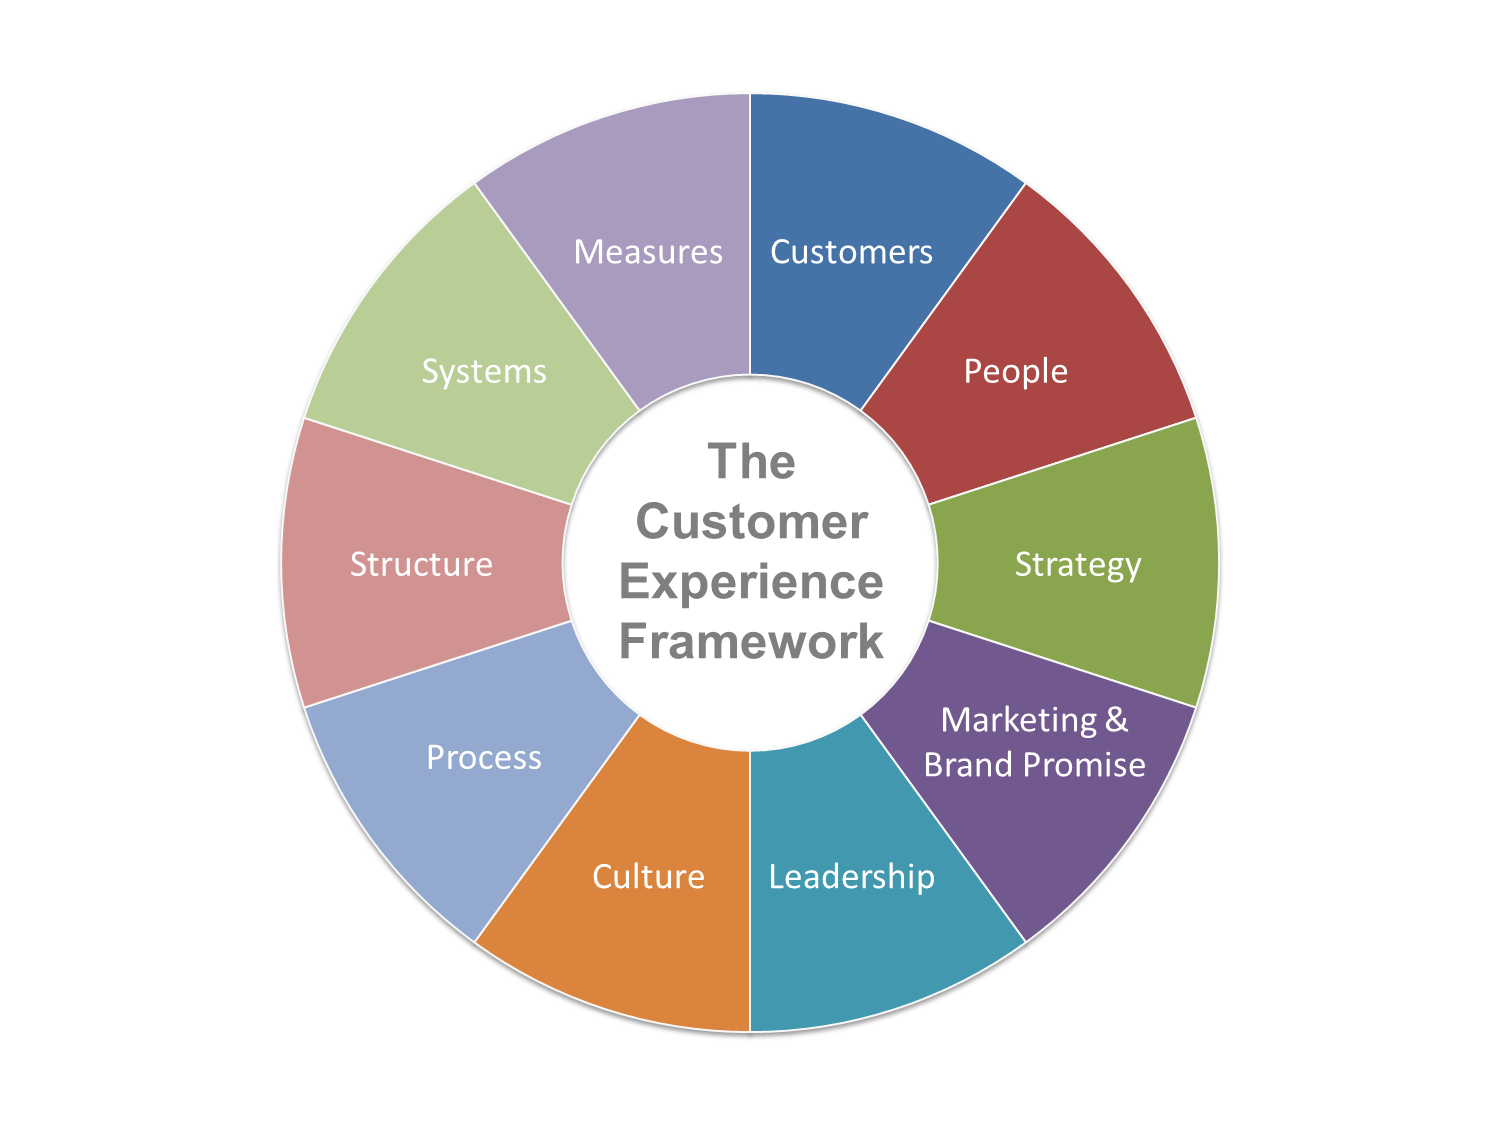 customer experience research design